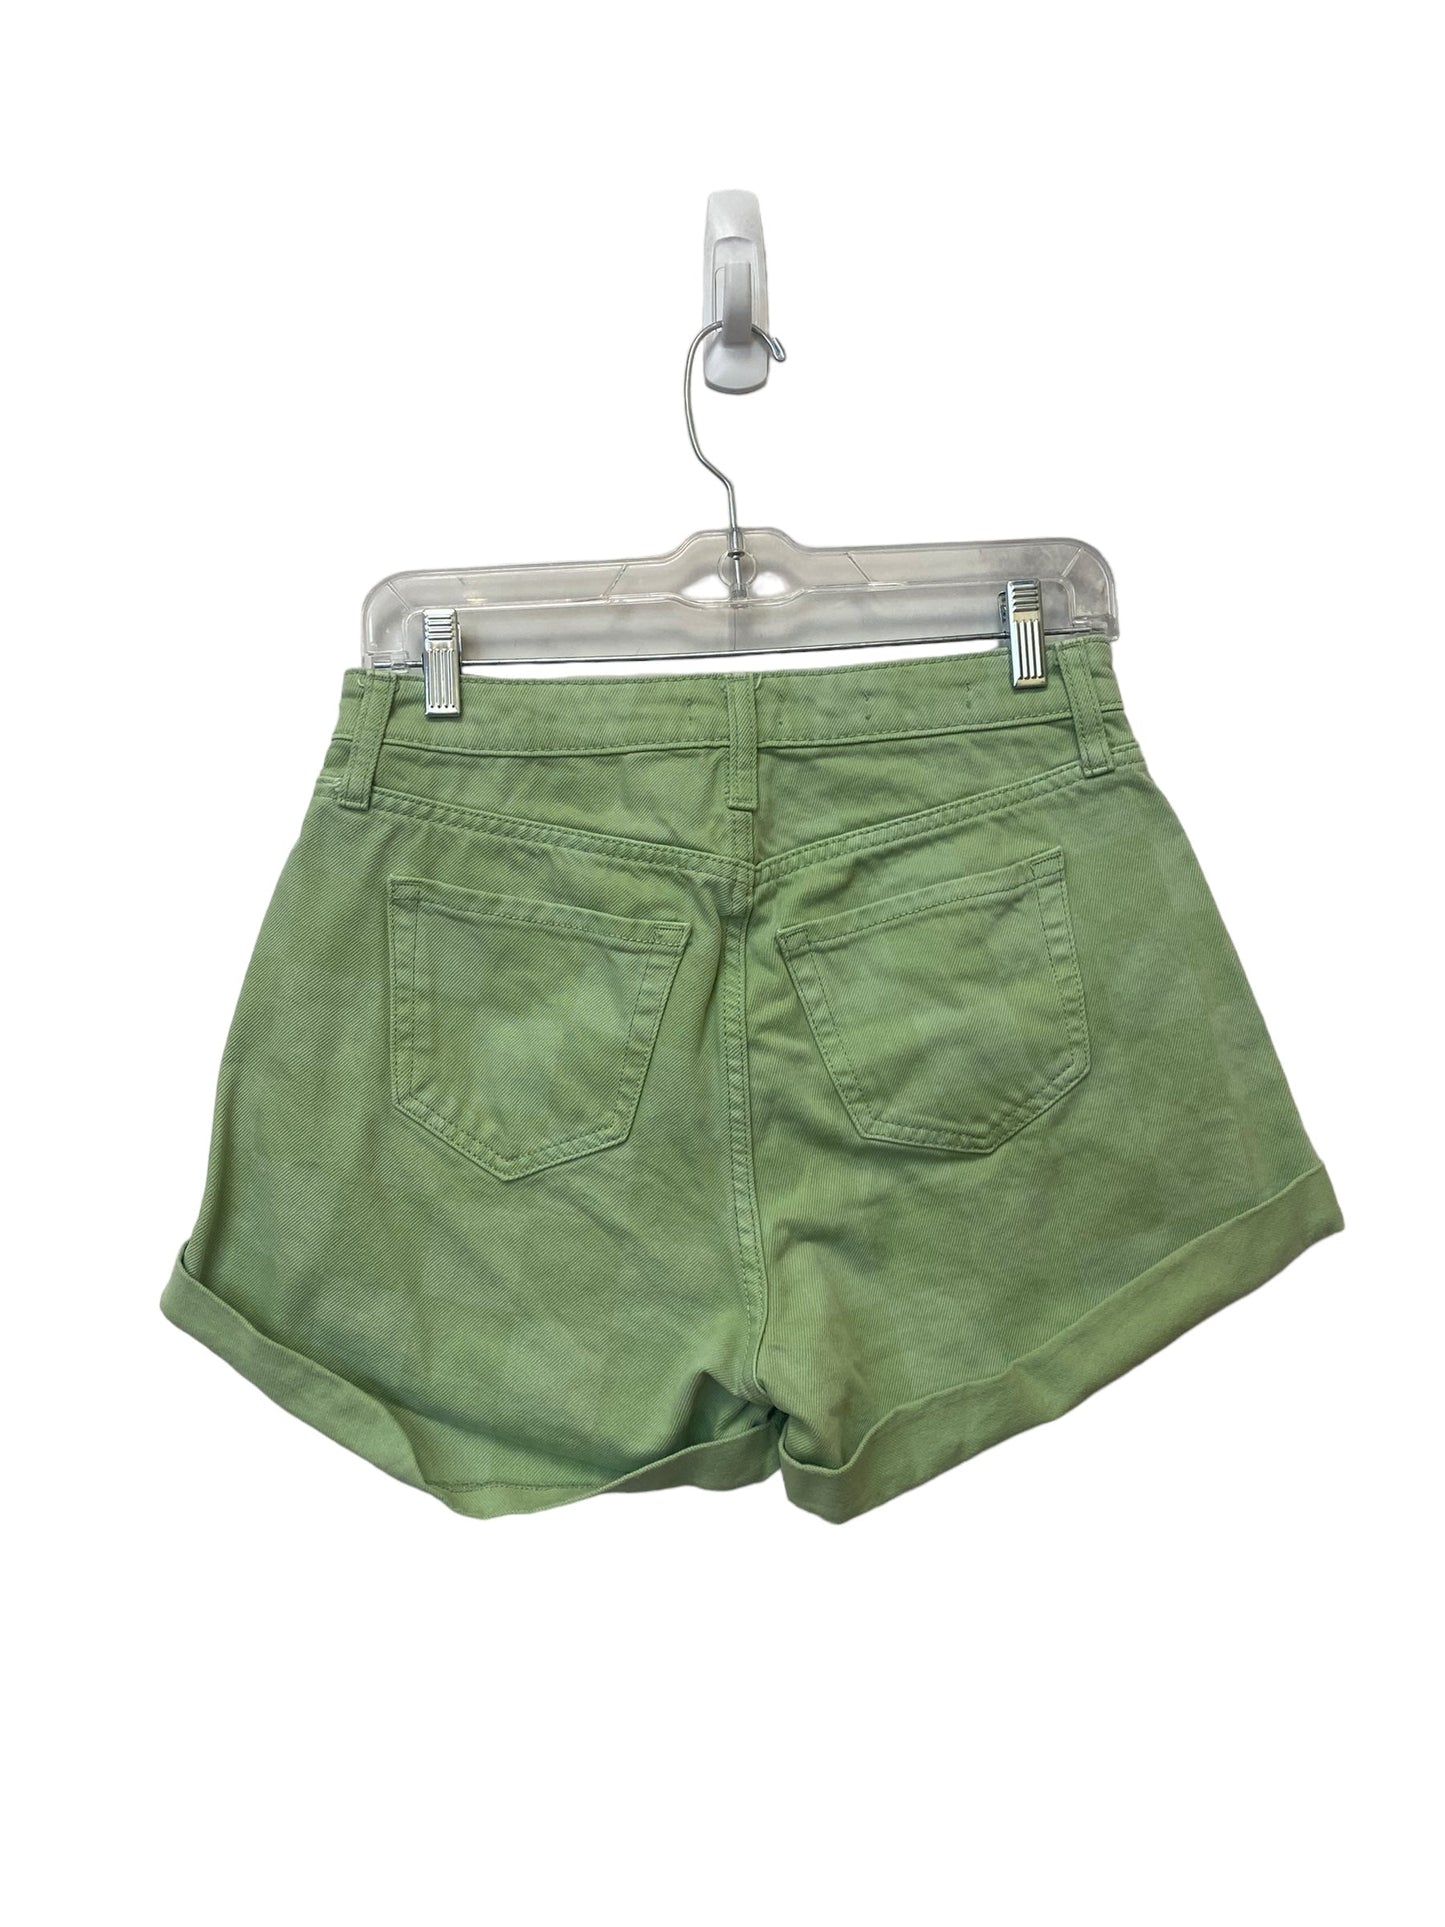 Green Shorts Wild Fable, Size 2